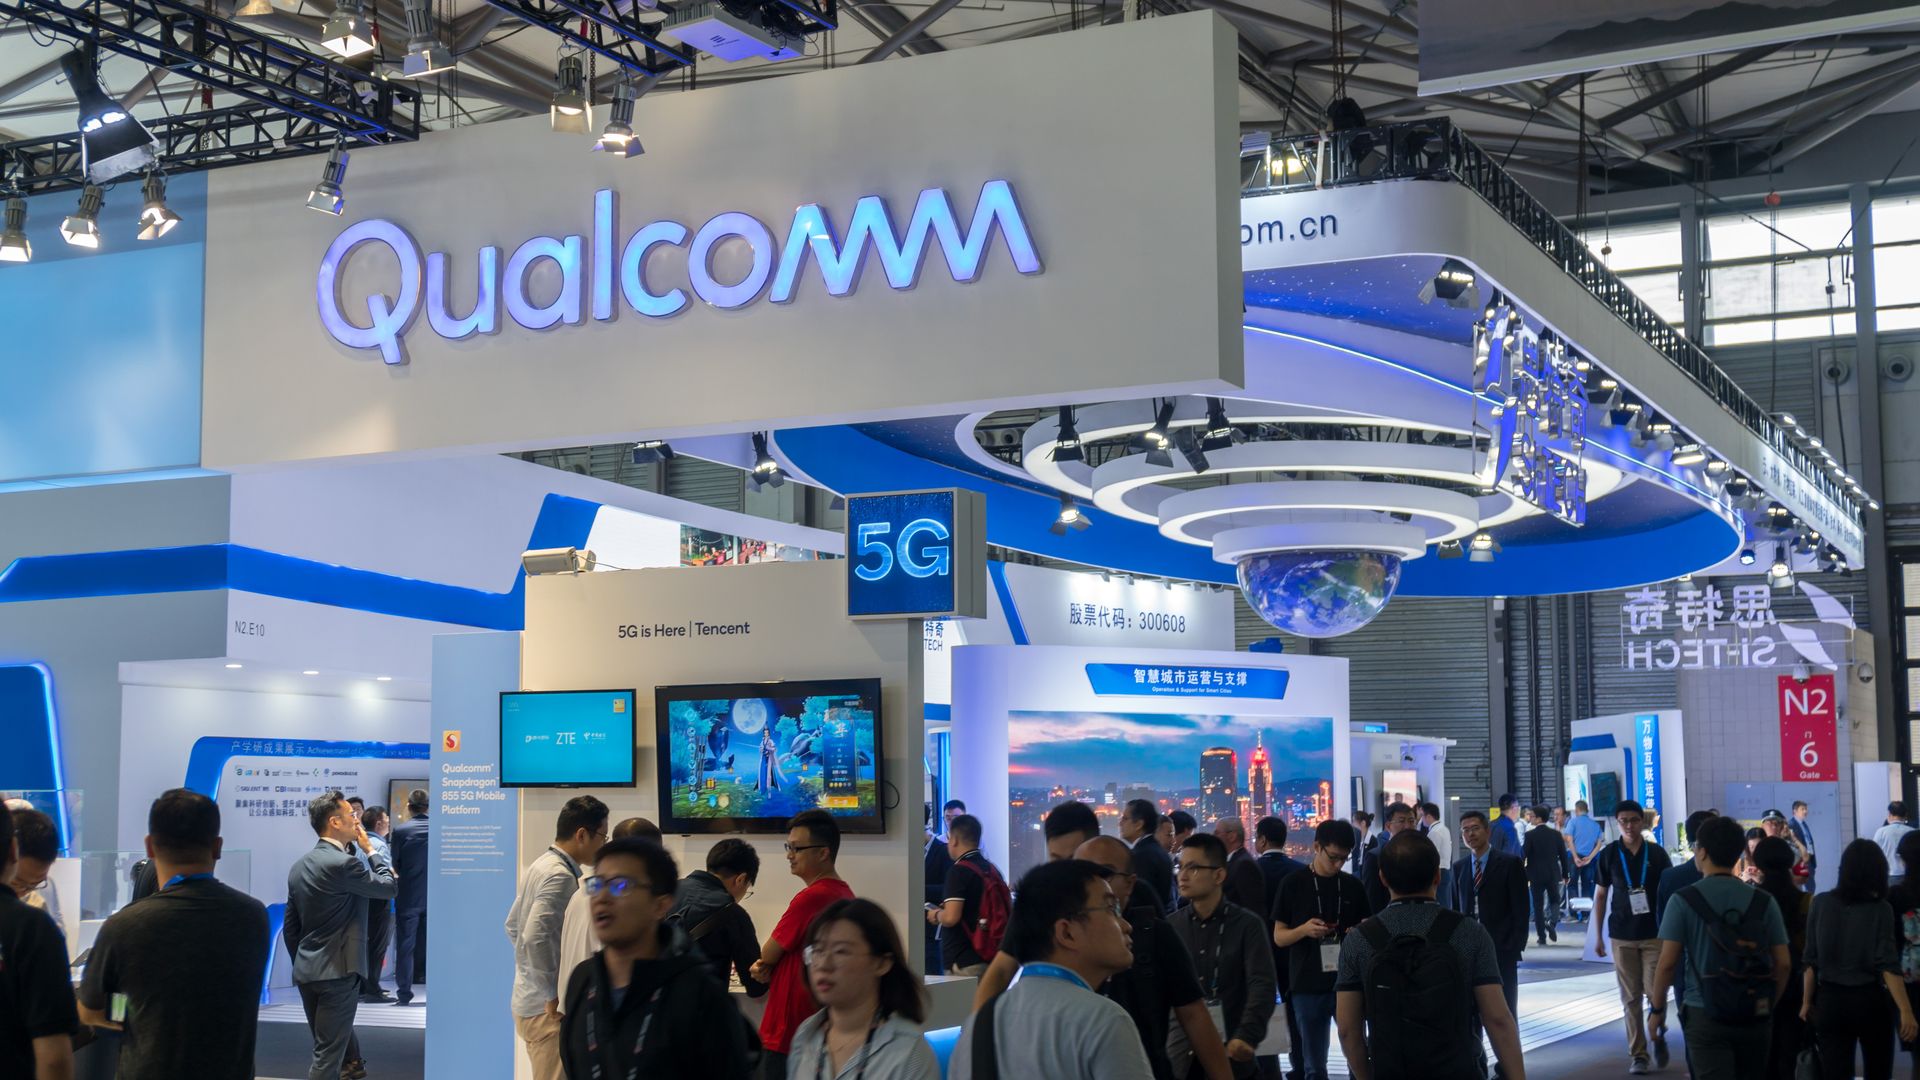 The Qualcomm booth at Mobile World Congress Shanghai in 2019